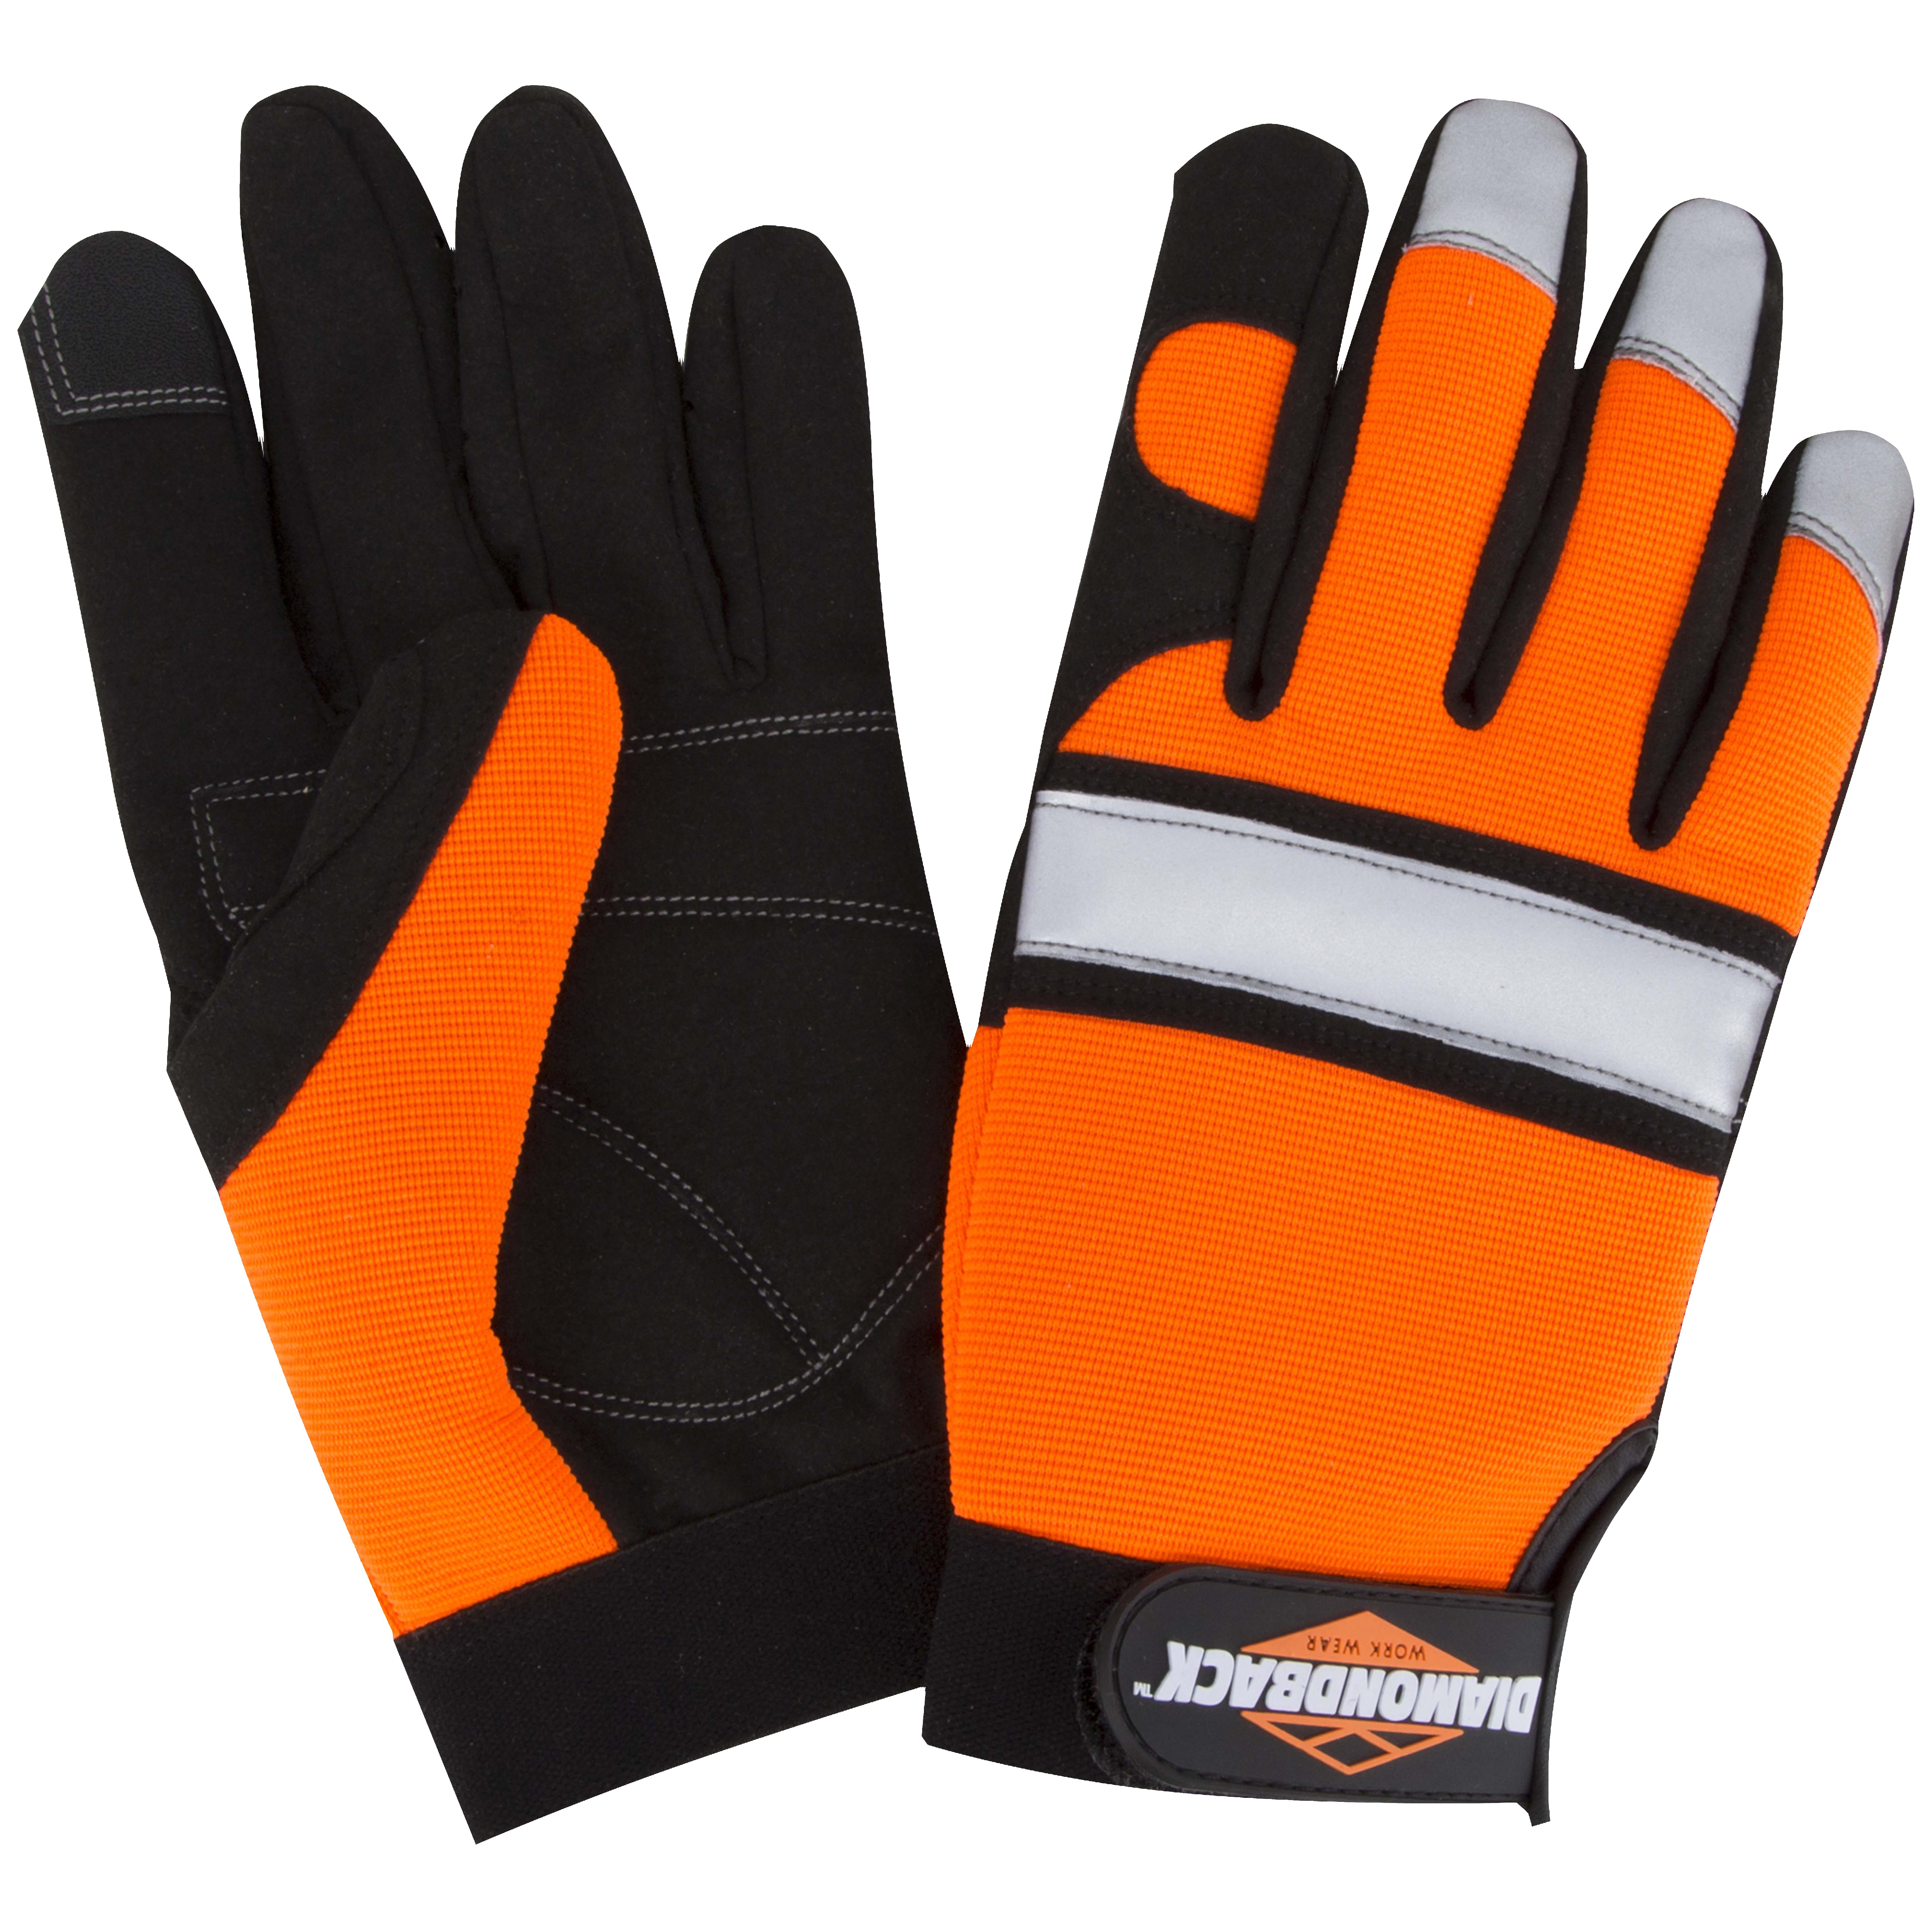 5959L Touchscreen Hi Visibility Mechanics Gloves, L 55% Synthetic leather 30% Spandex 10% Reflective Fabric 5% Elastic Band